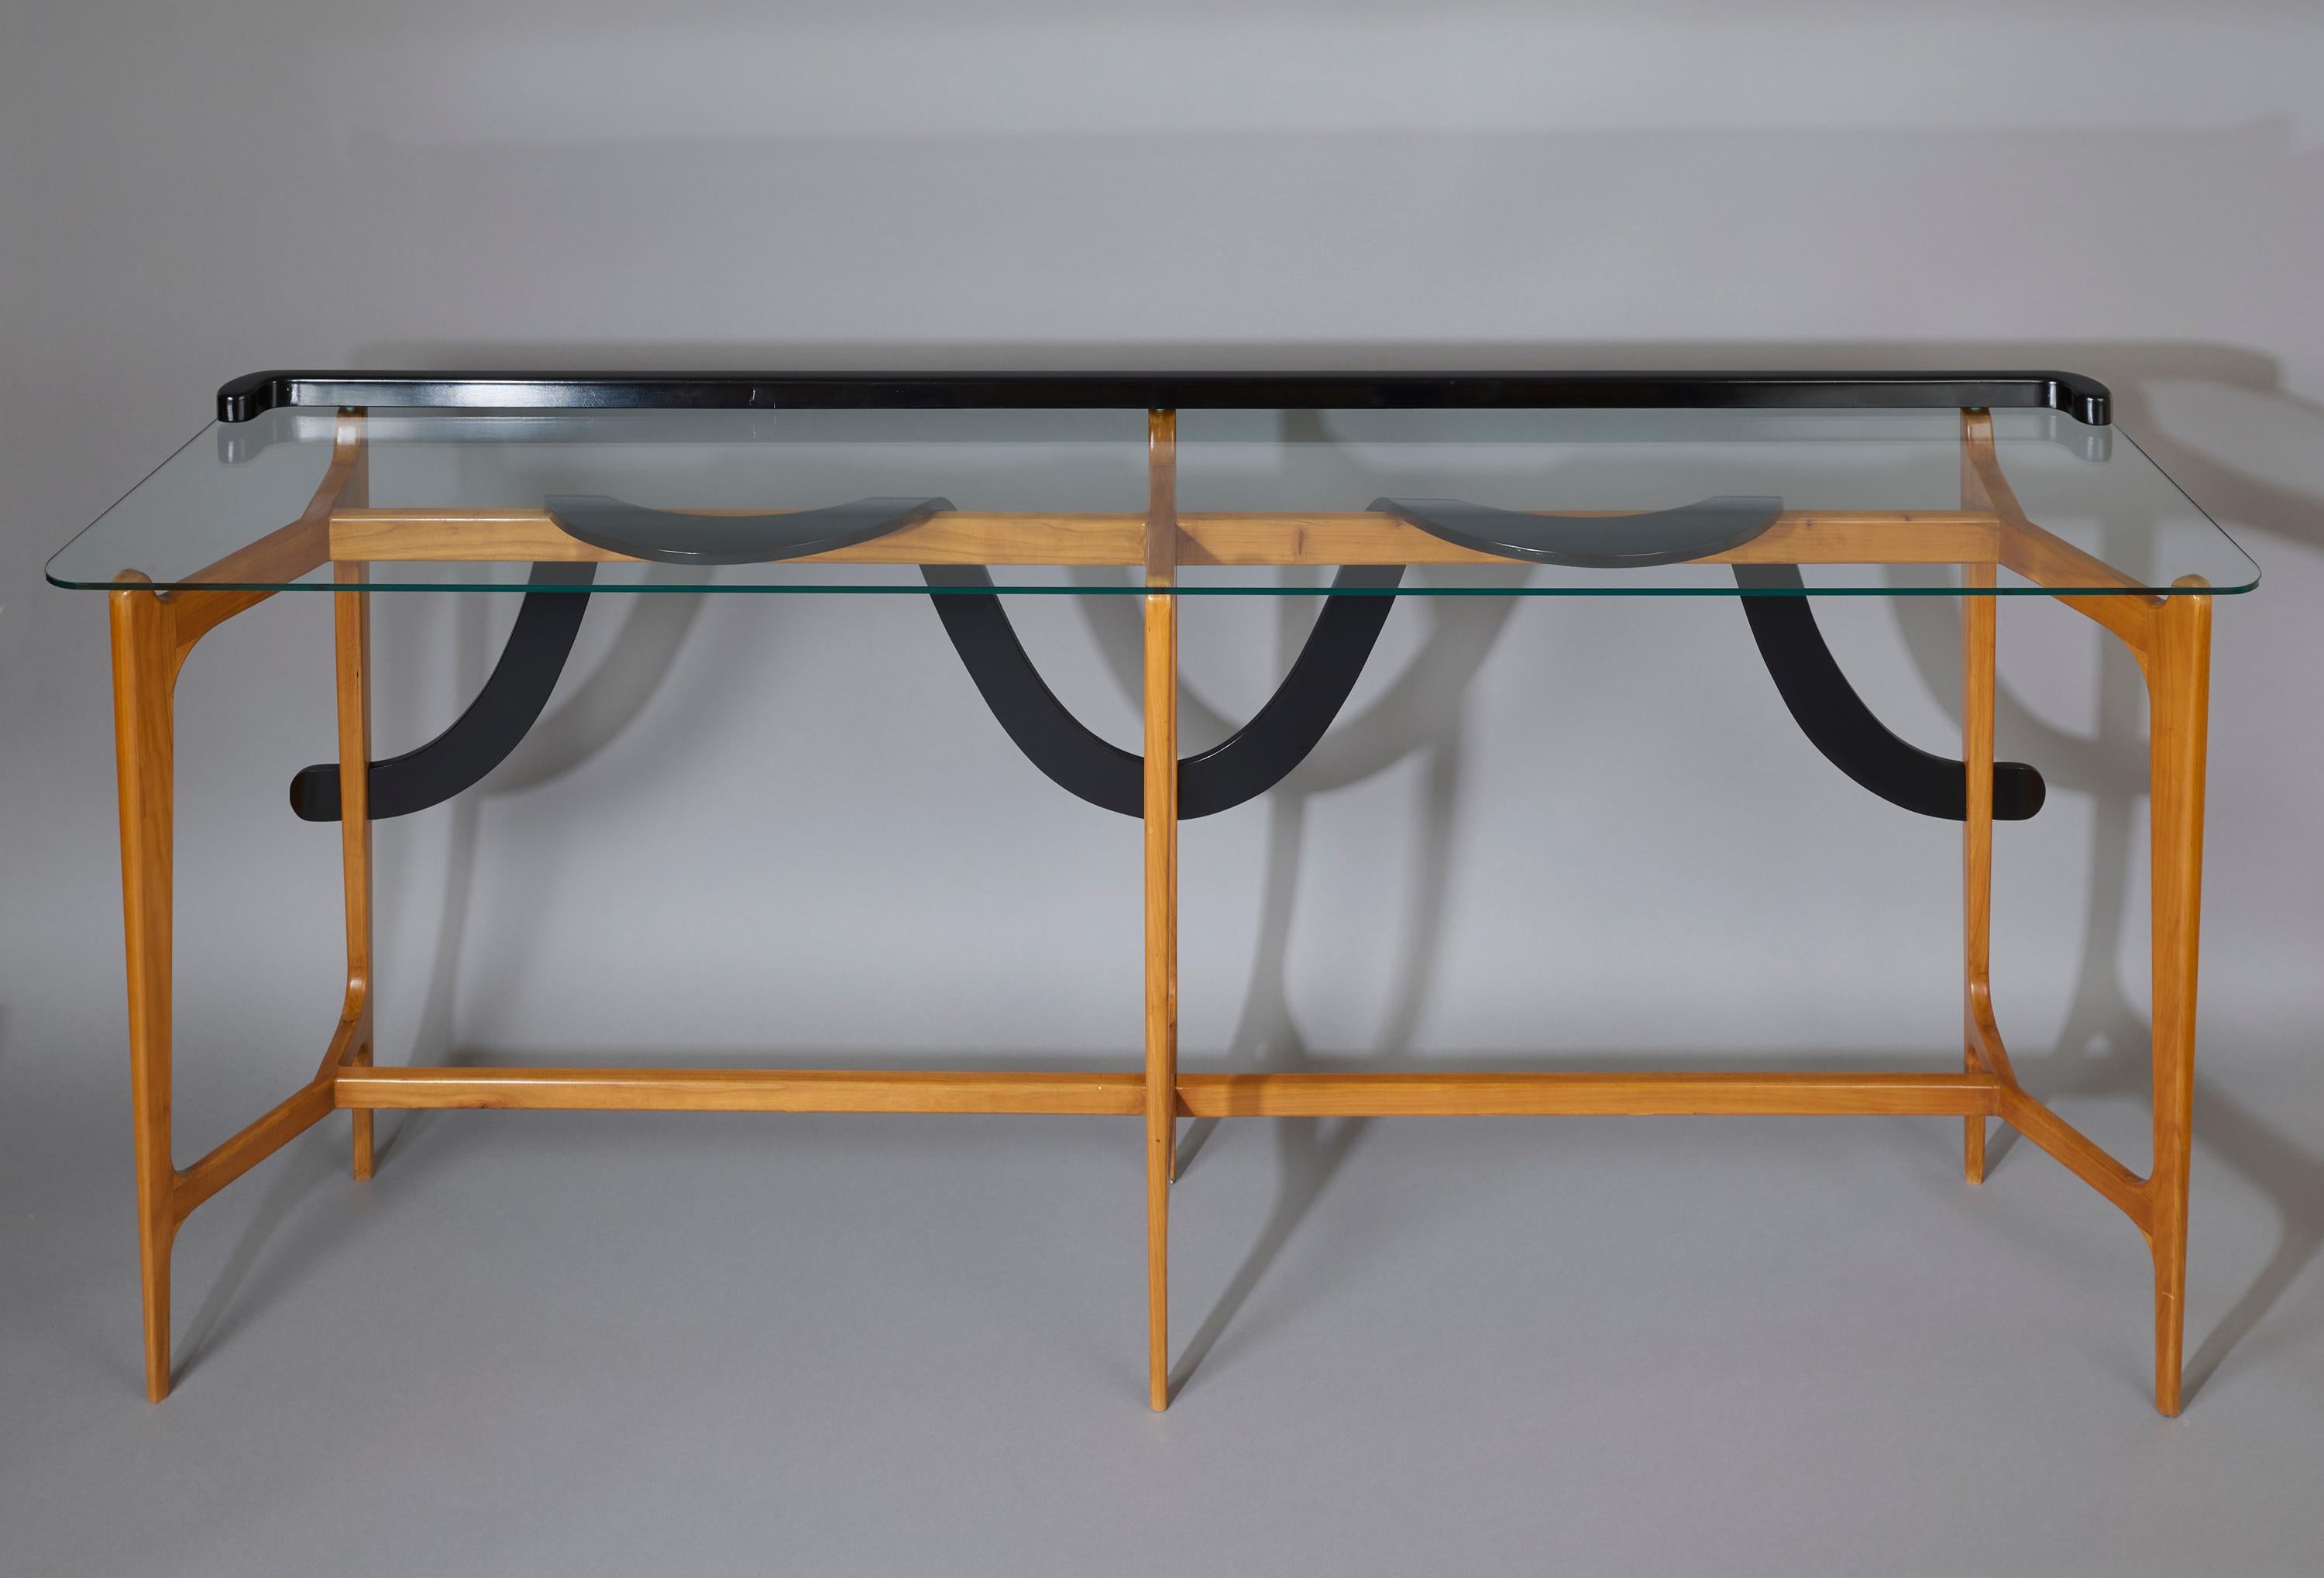 Fruitwood Ico Parisi: Exquisite Sculptural Console in Polished & Ebonized Wood, Italy 1950 For Sale